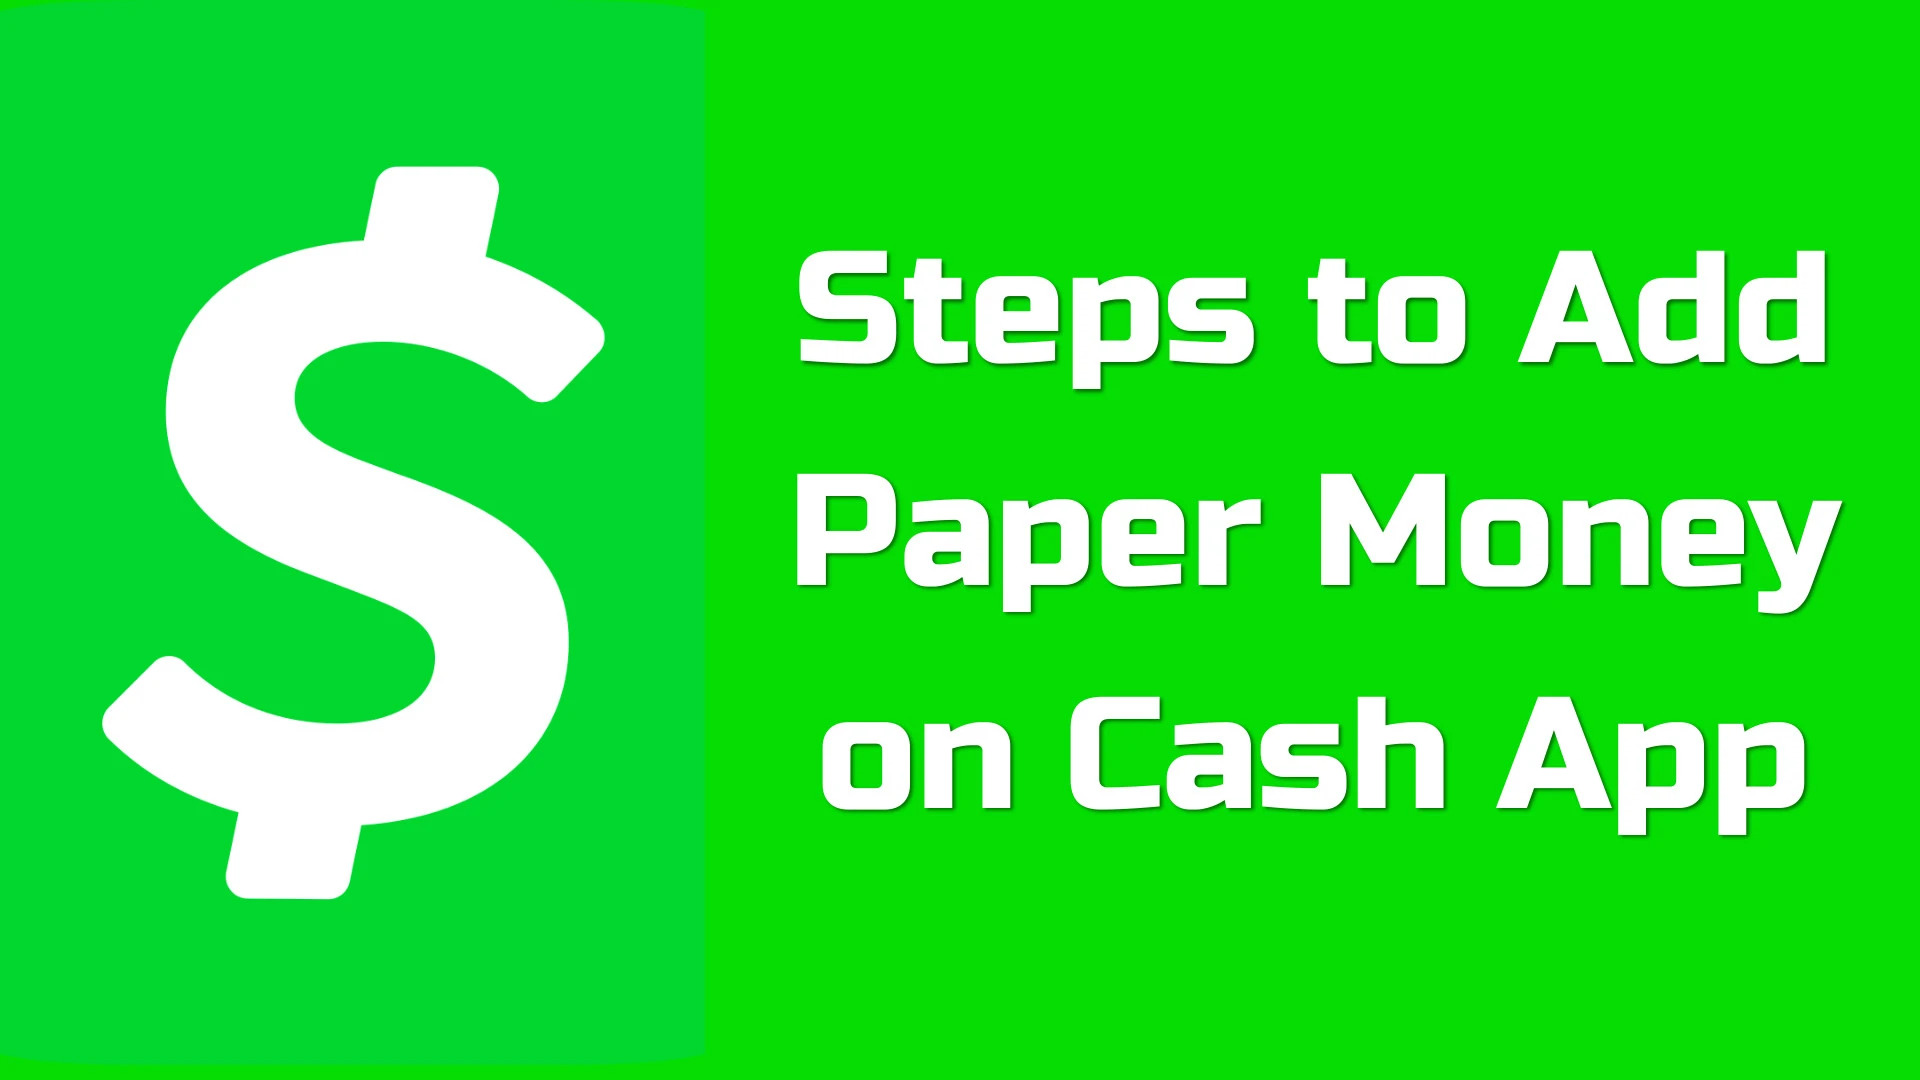 How to Add Paper Money to Your Cash App Balance: A Guide